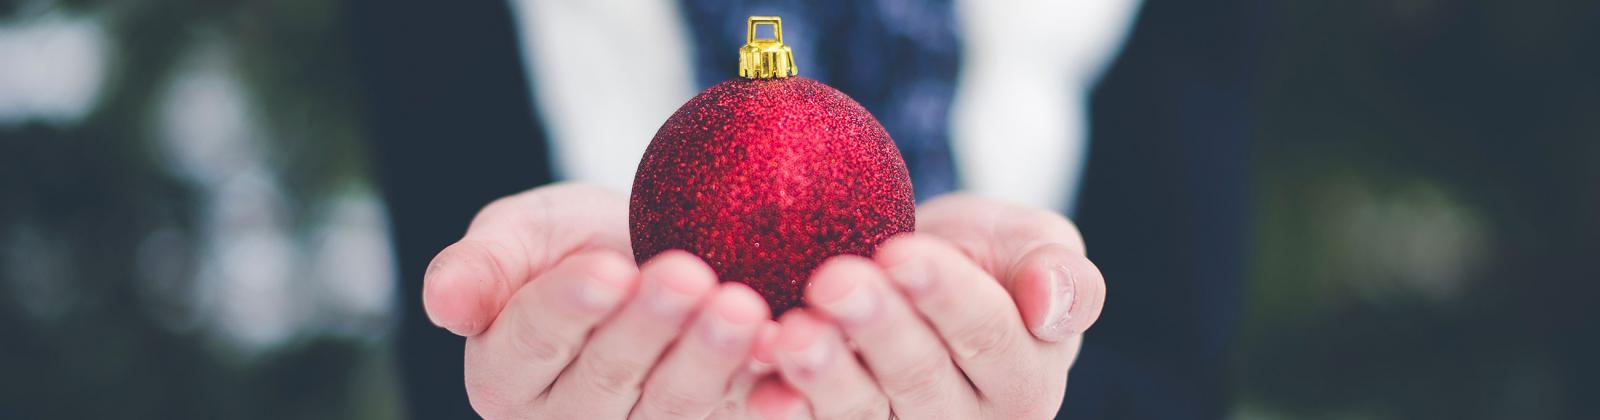 Student holding a Christmas ornament